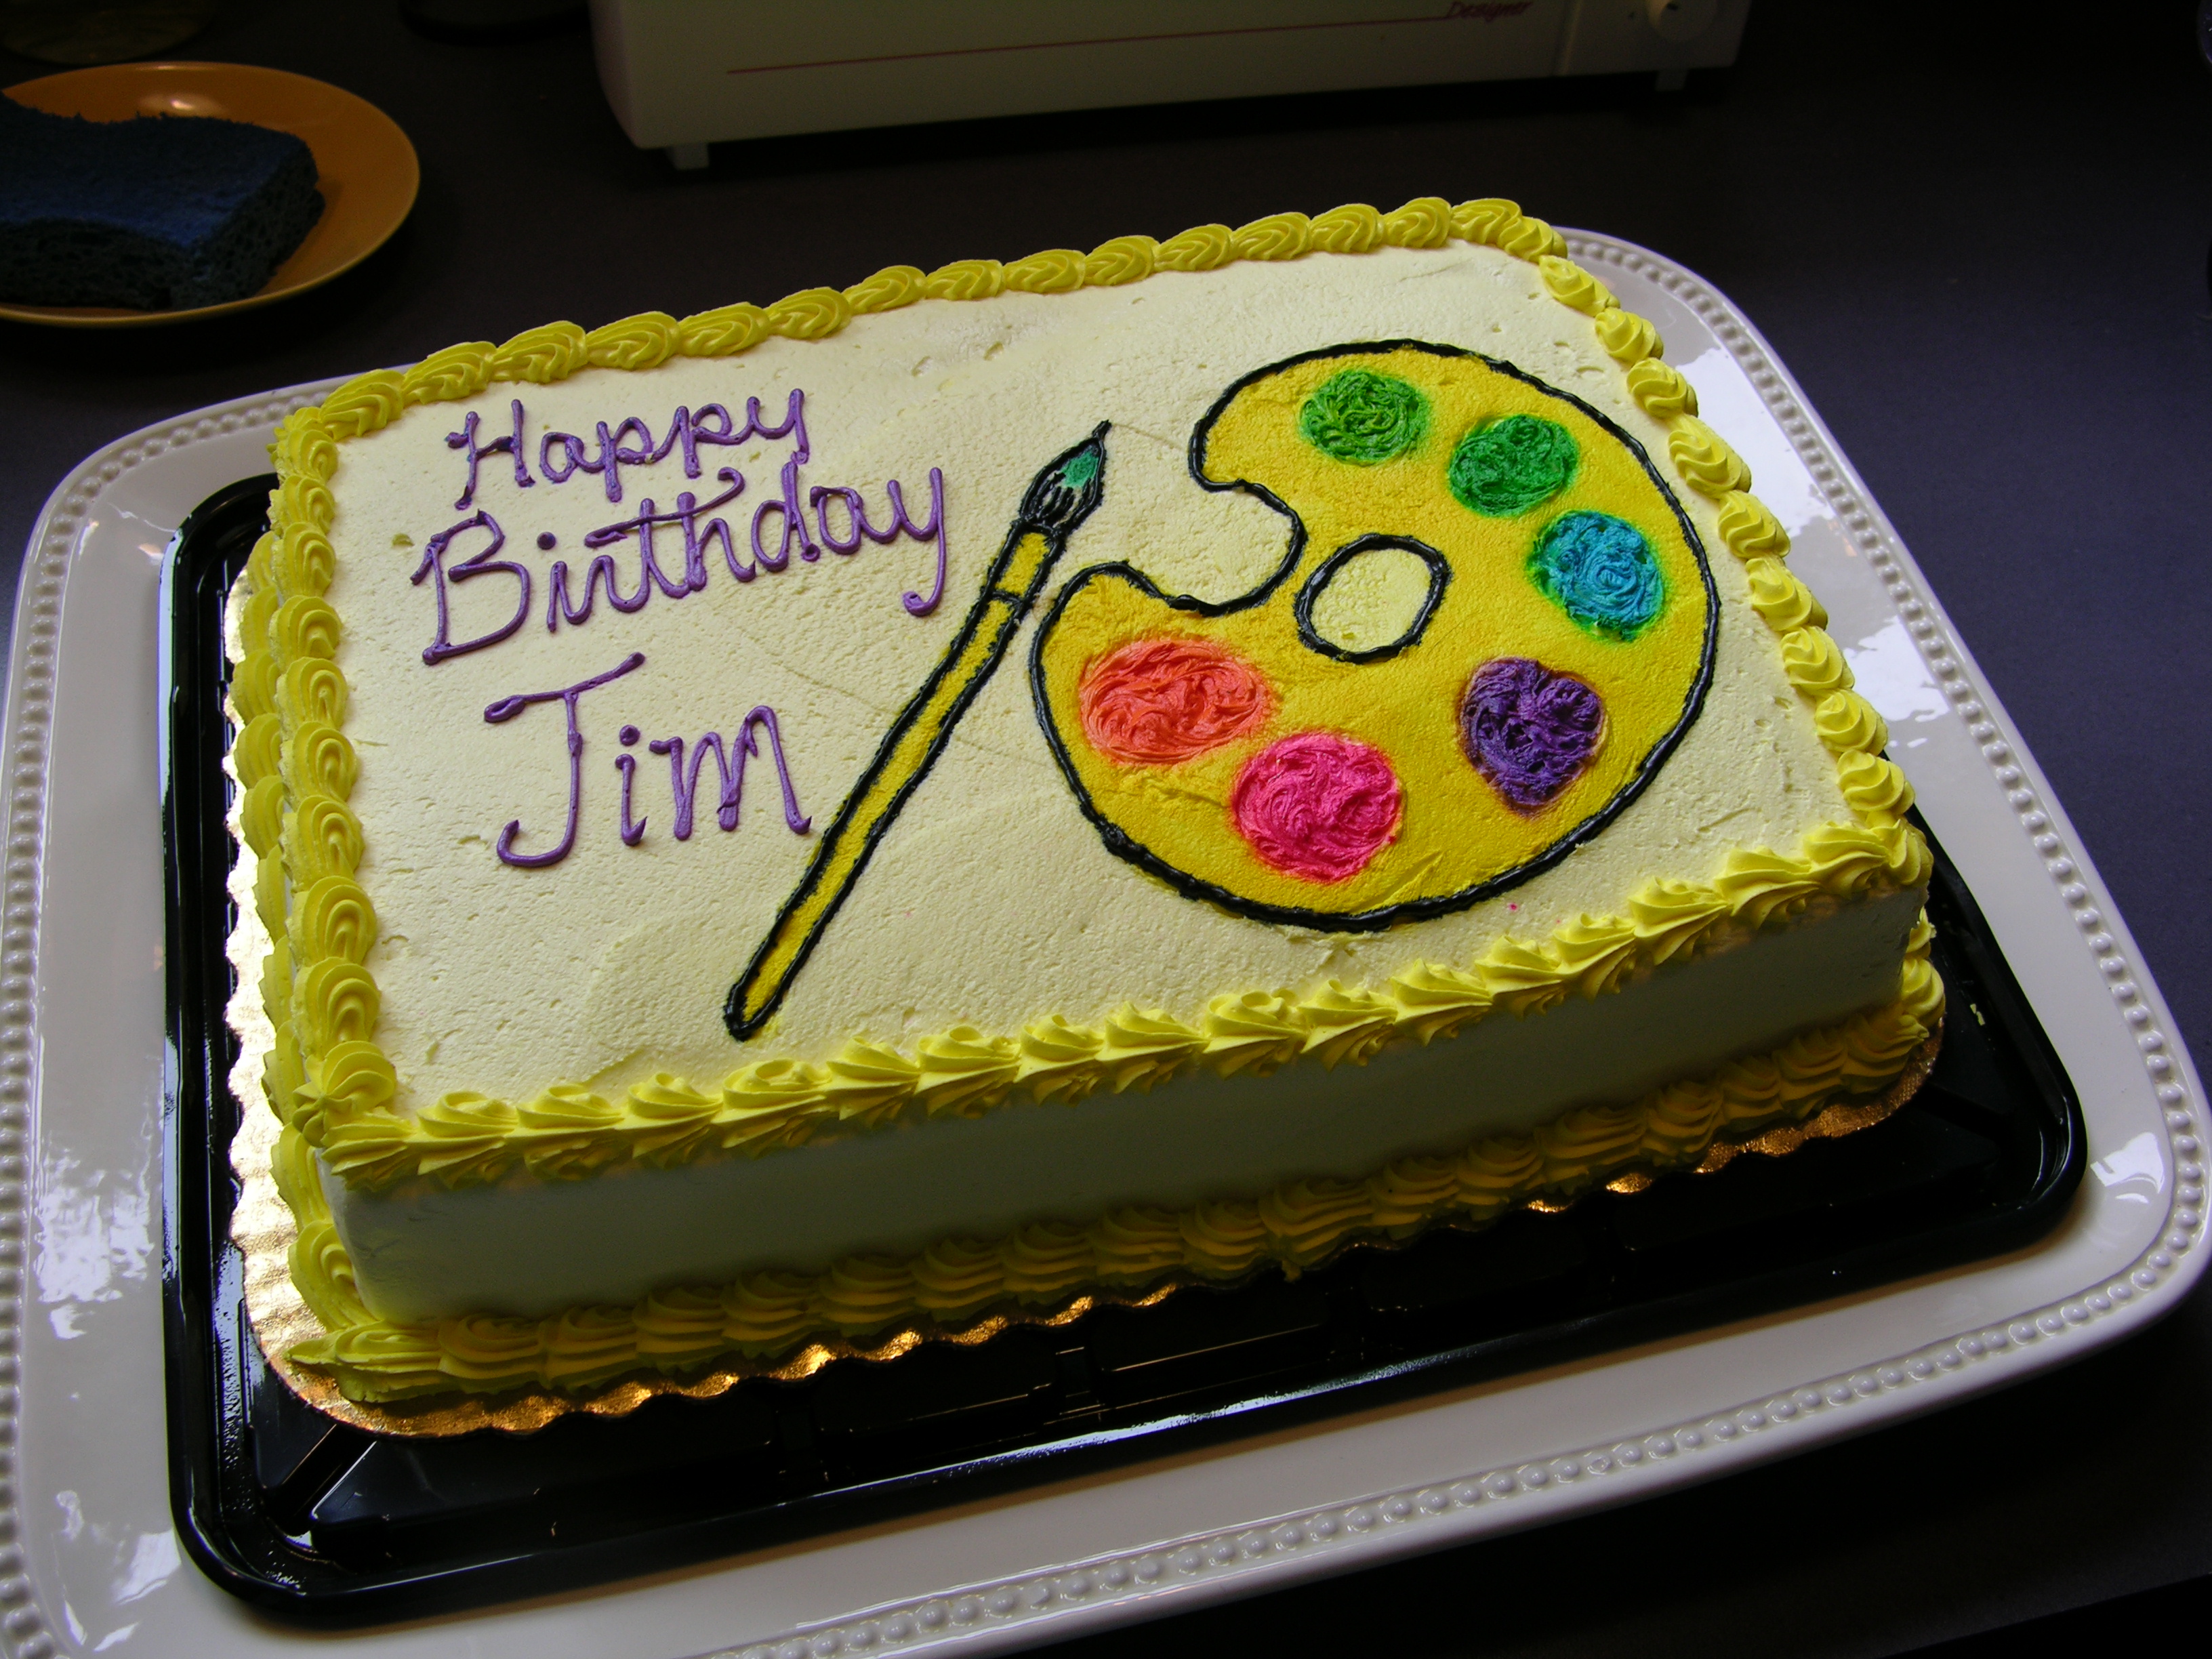 Happy Birthday Jim Alfredson! - Page 3 - Miscellaneous - Non-Political - organissimo forums